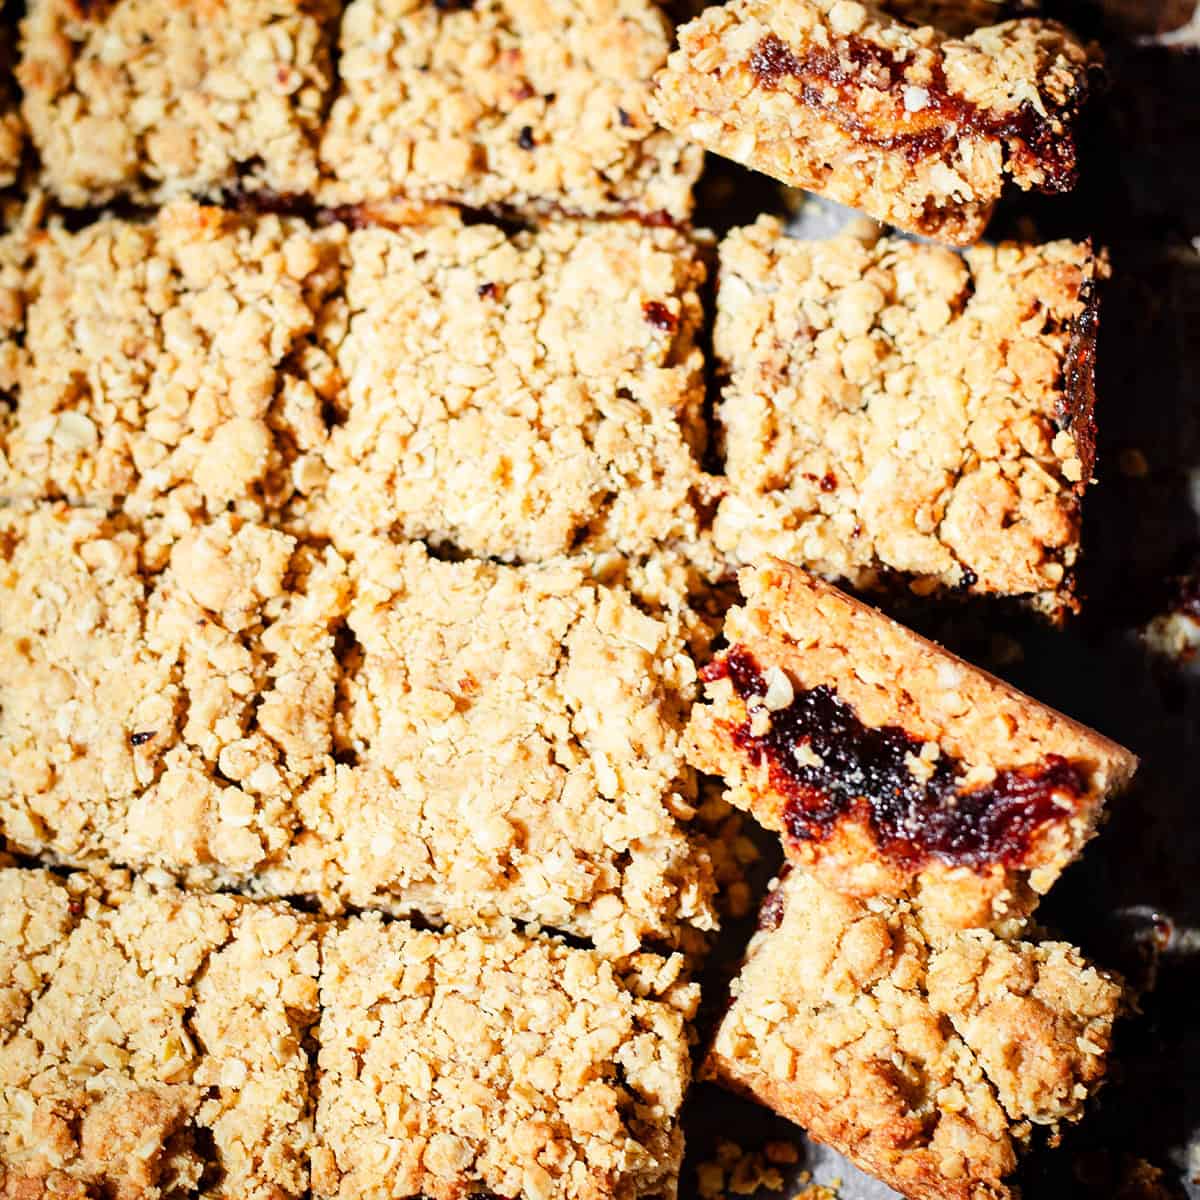 Date Bars cut into squares on baking paper